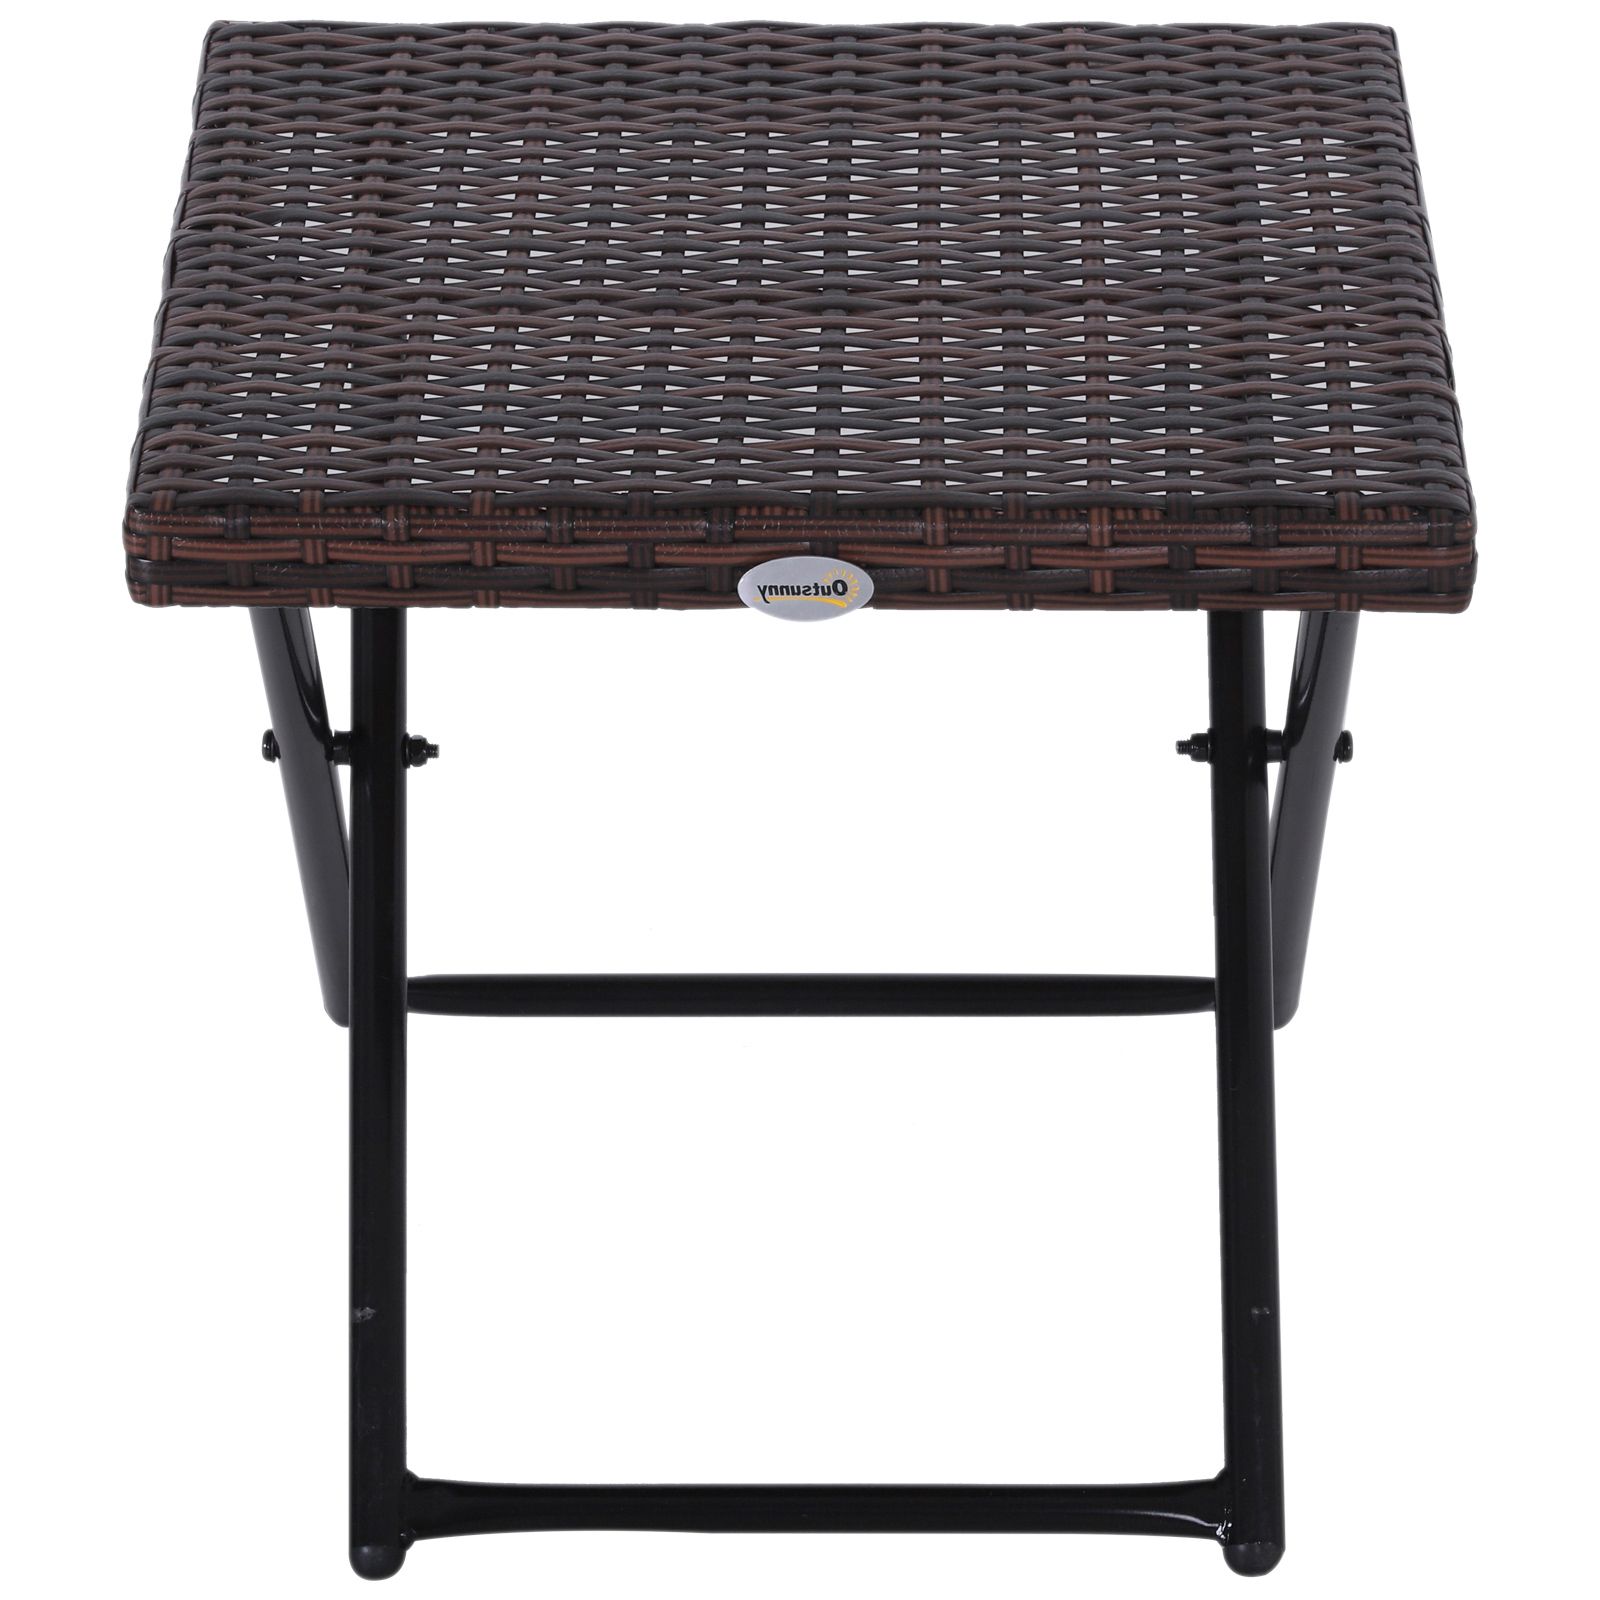 Outsunny Folding Square Rattan Coffee Table Bistro Balcony Garden Steel For Best And Newest Coffee Tables For Balconies (View 6 of 15)